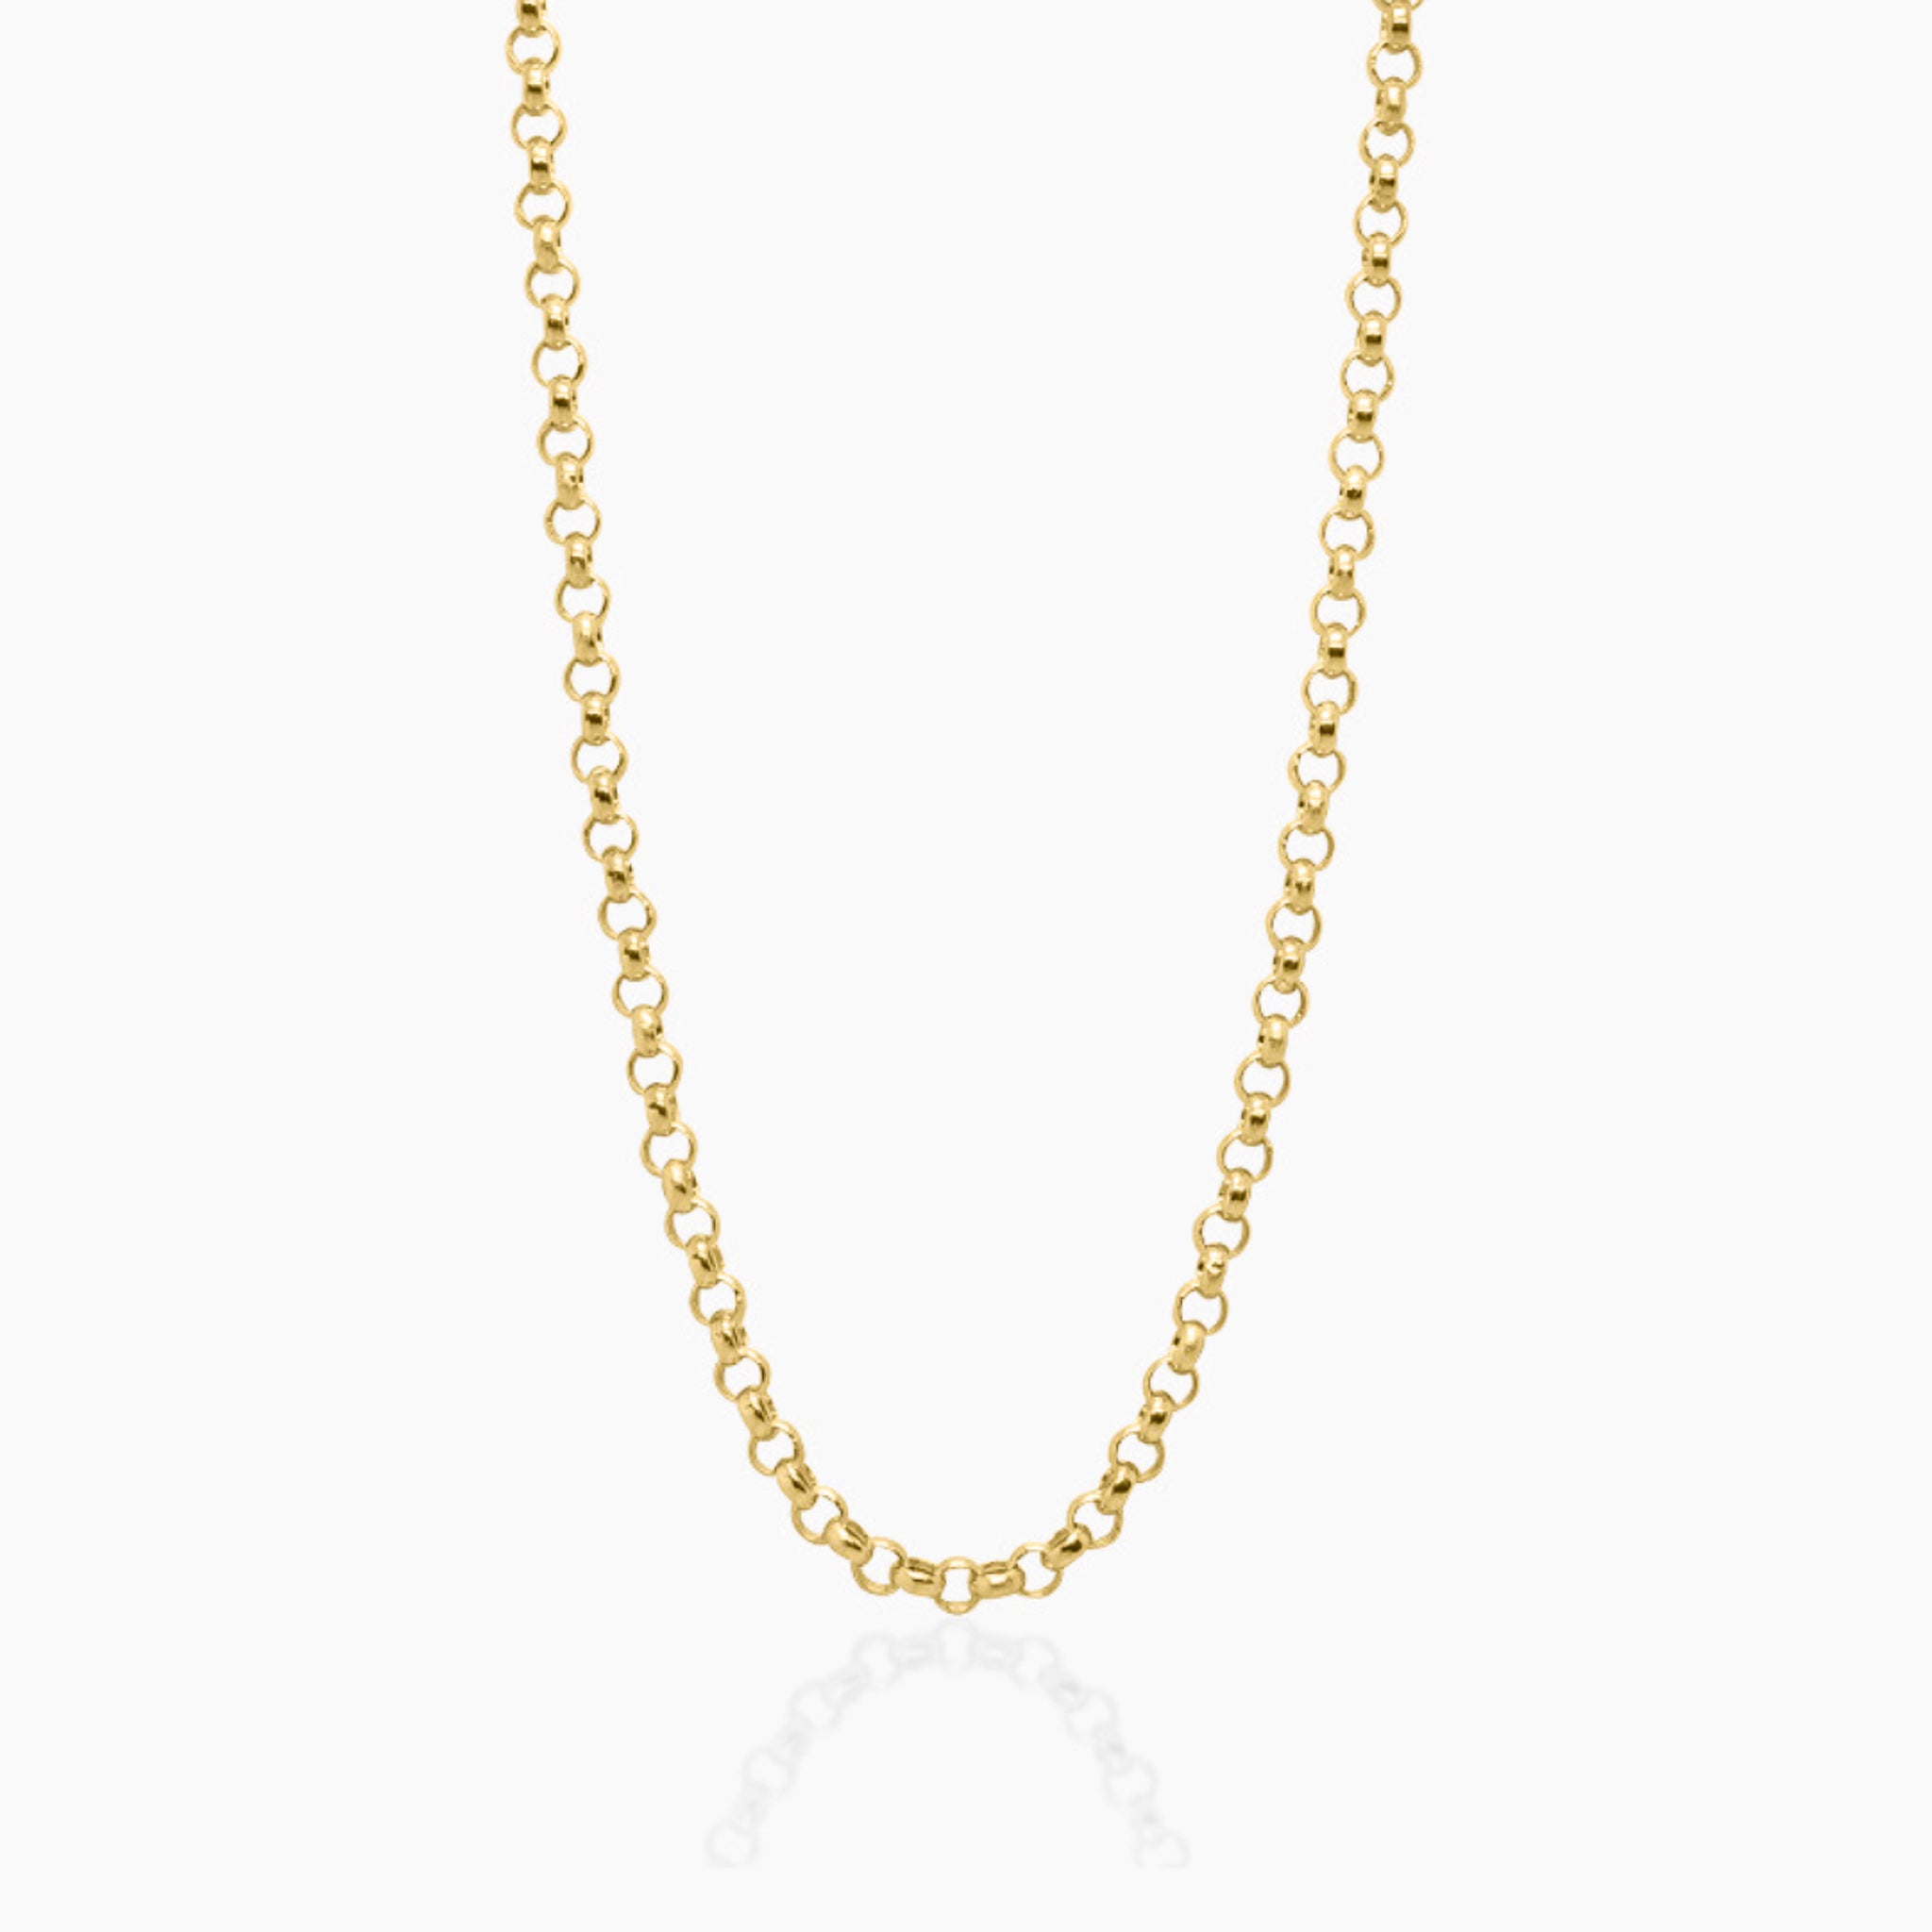 14K YELLOW GOLD ROUND ROLO CHAIN -2.5MM